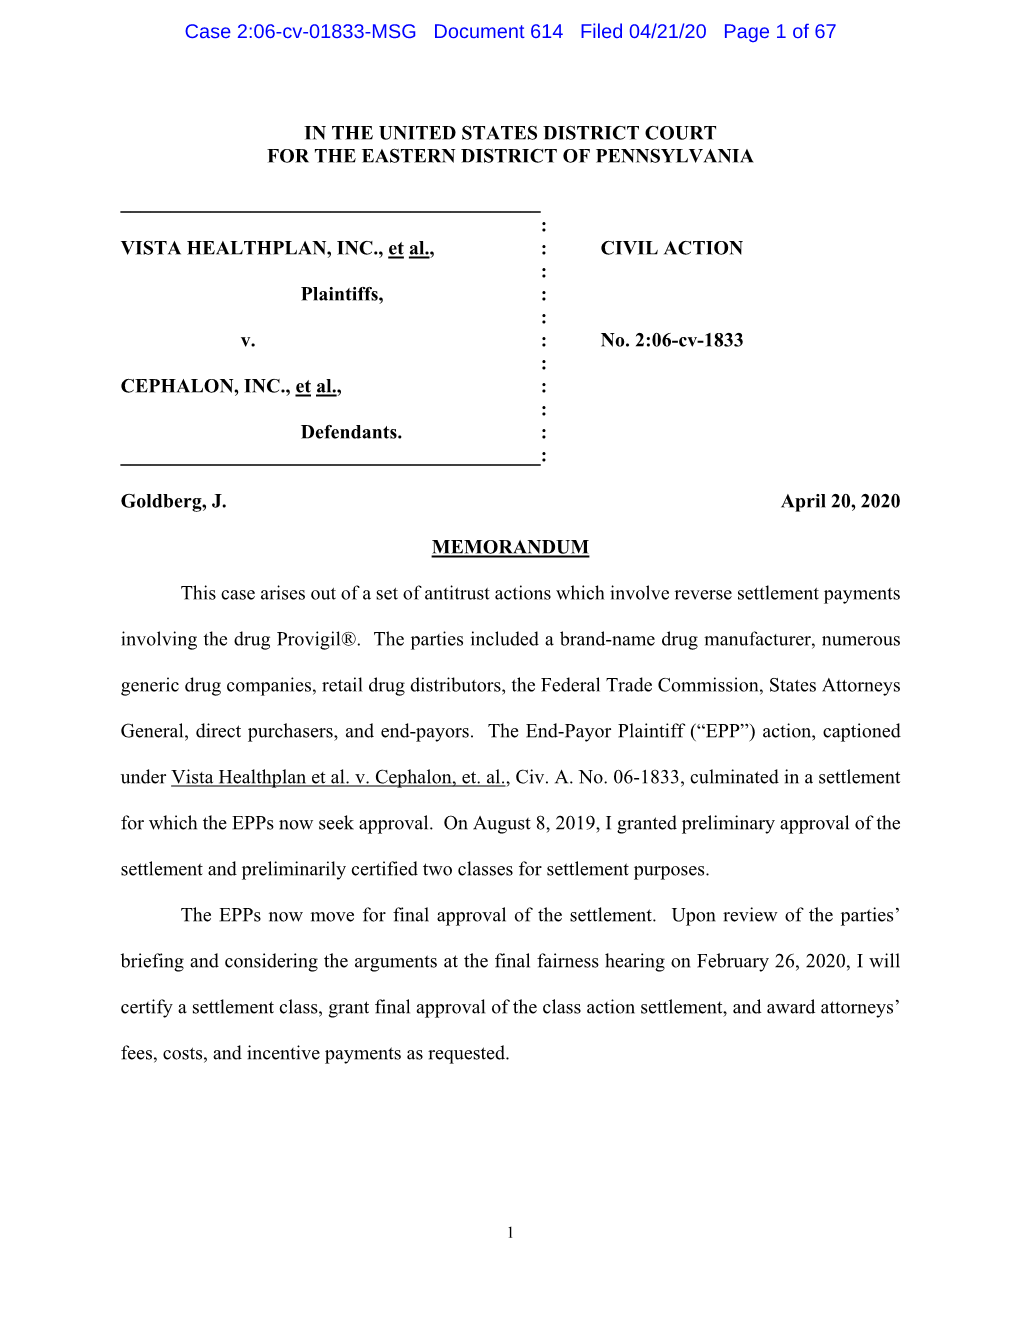 Case 2:06-Cv-01833-MSG Document 614 Filed 04/21/20 Page 1 of 67